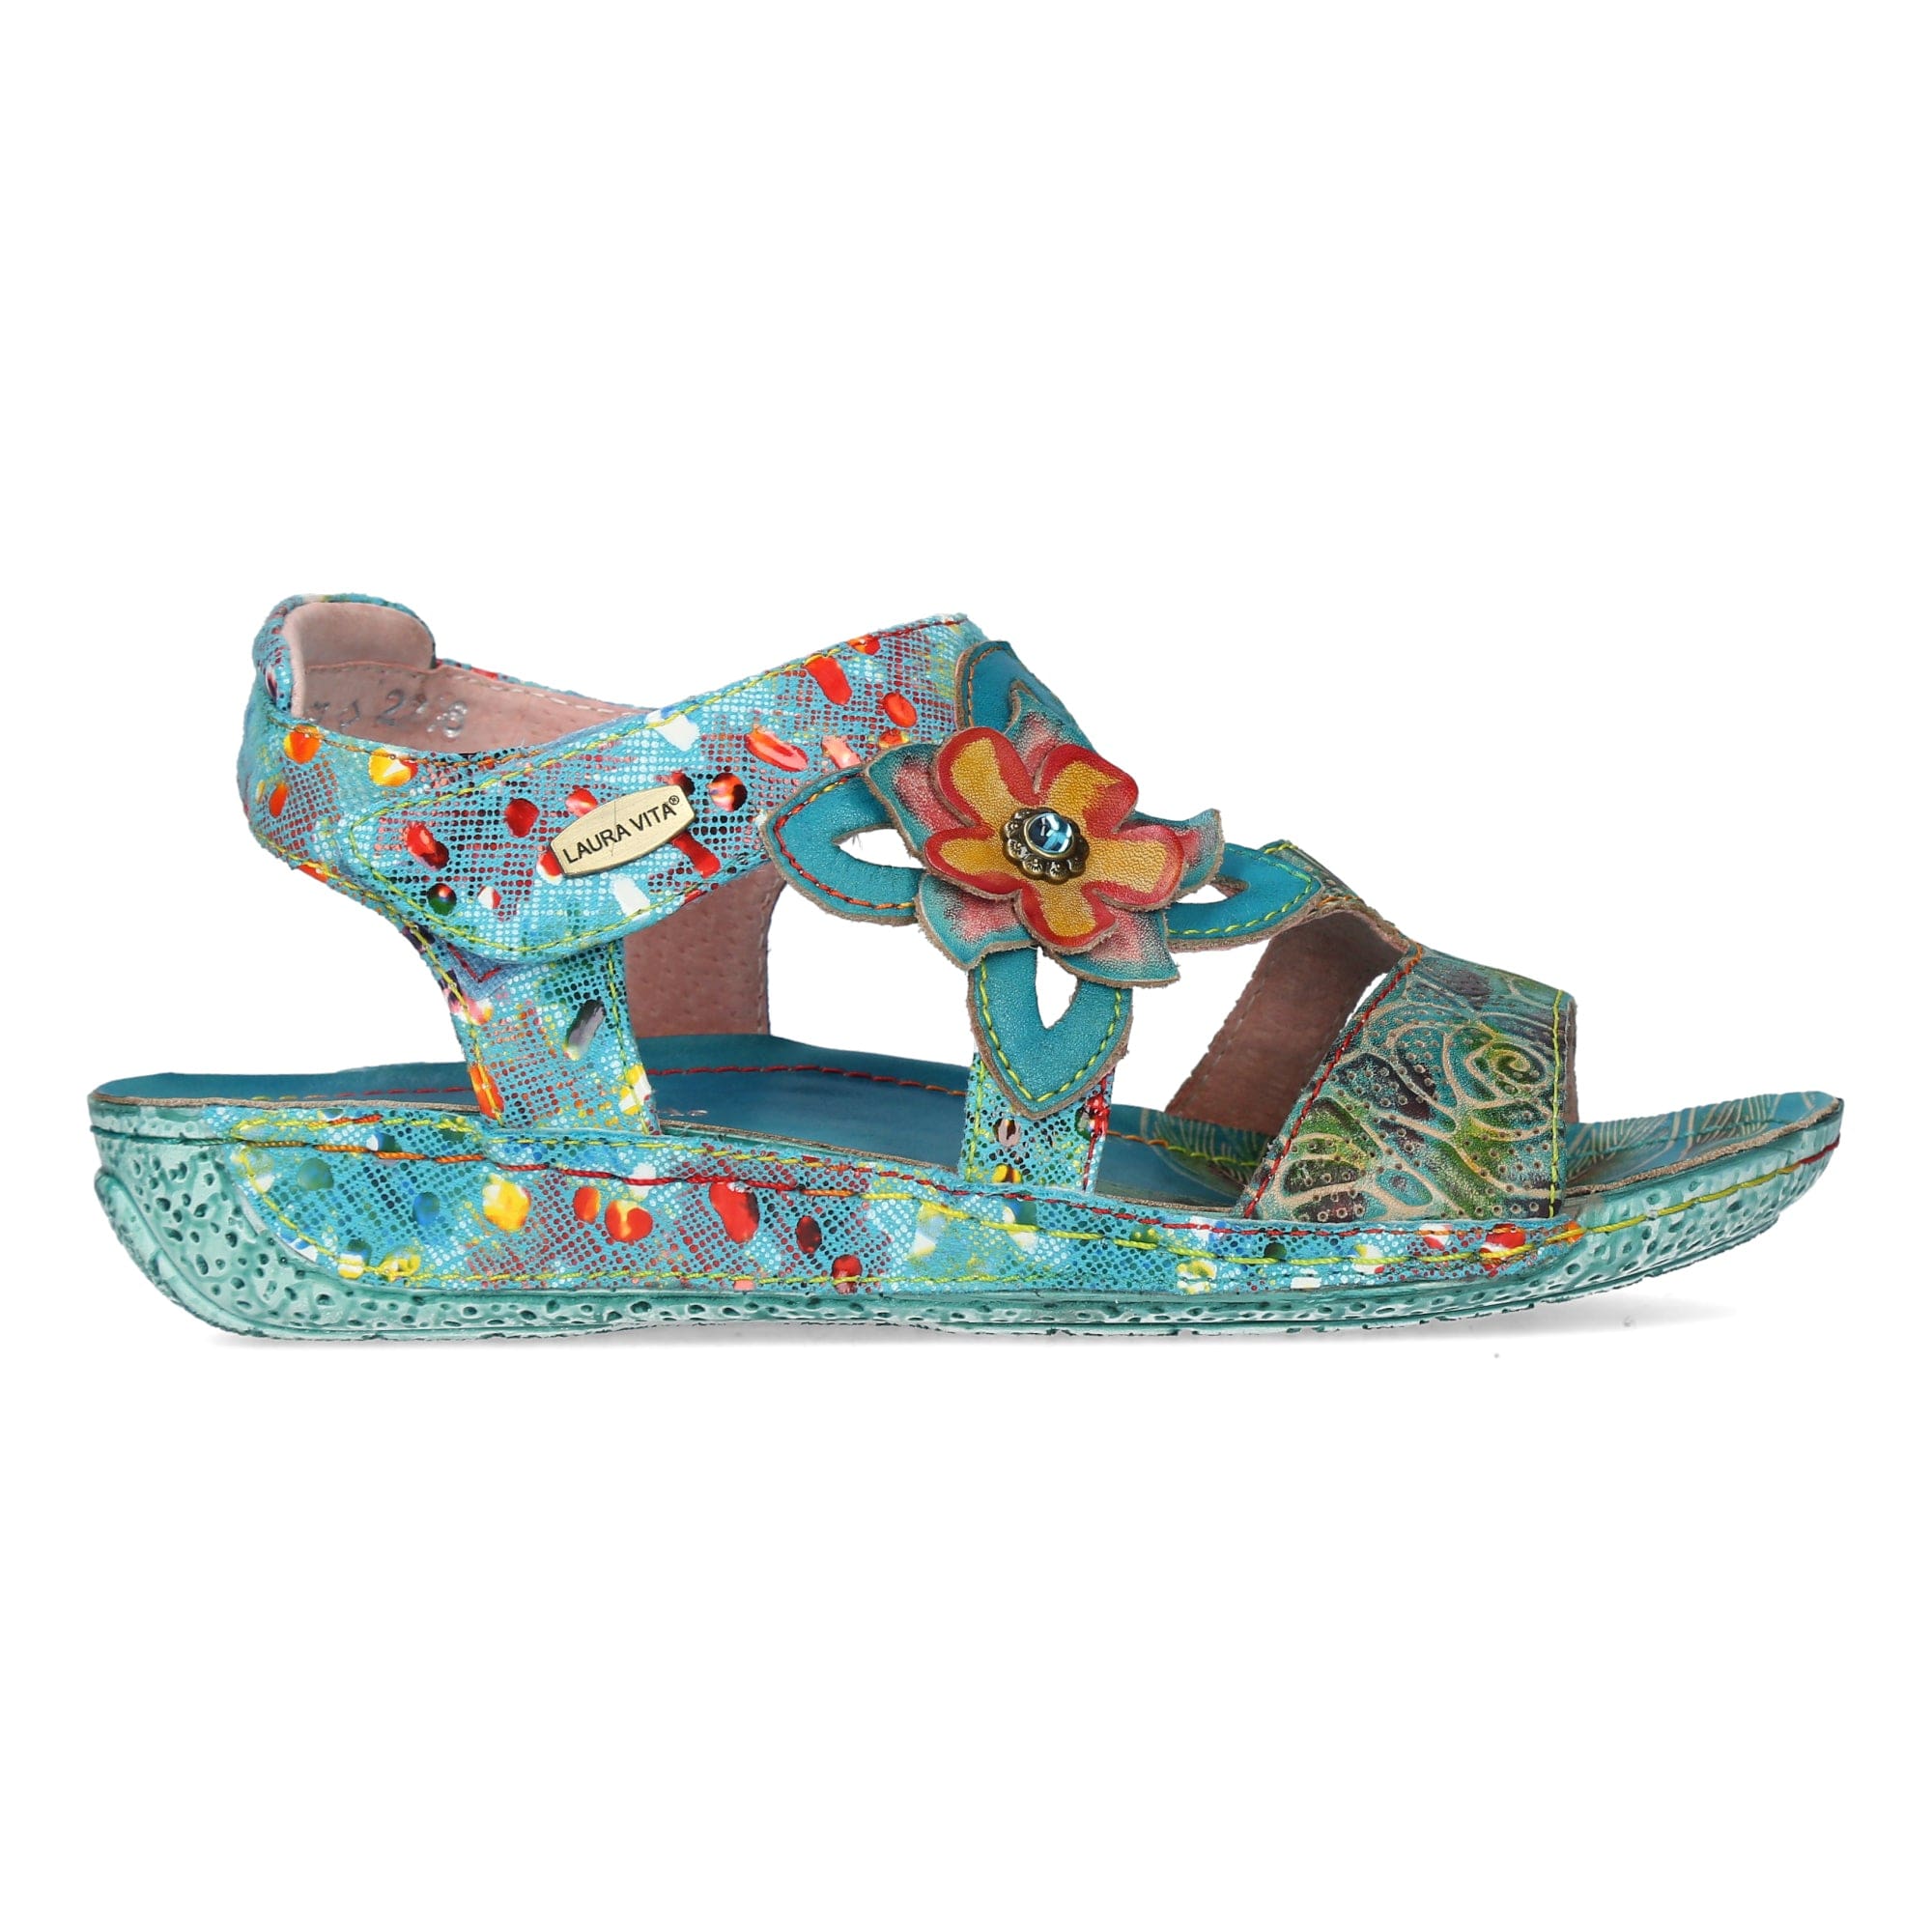 Chaussure LINAO 10 - 35 / Turquoise - Sandale